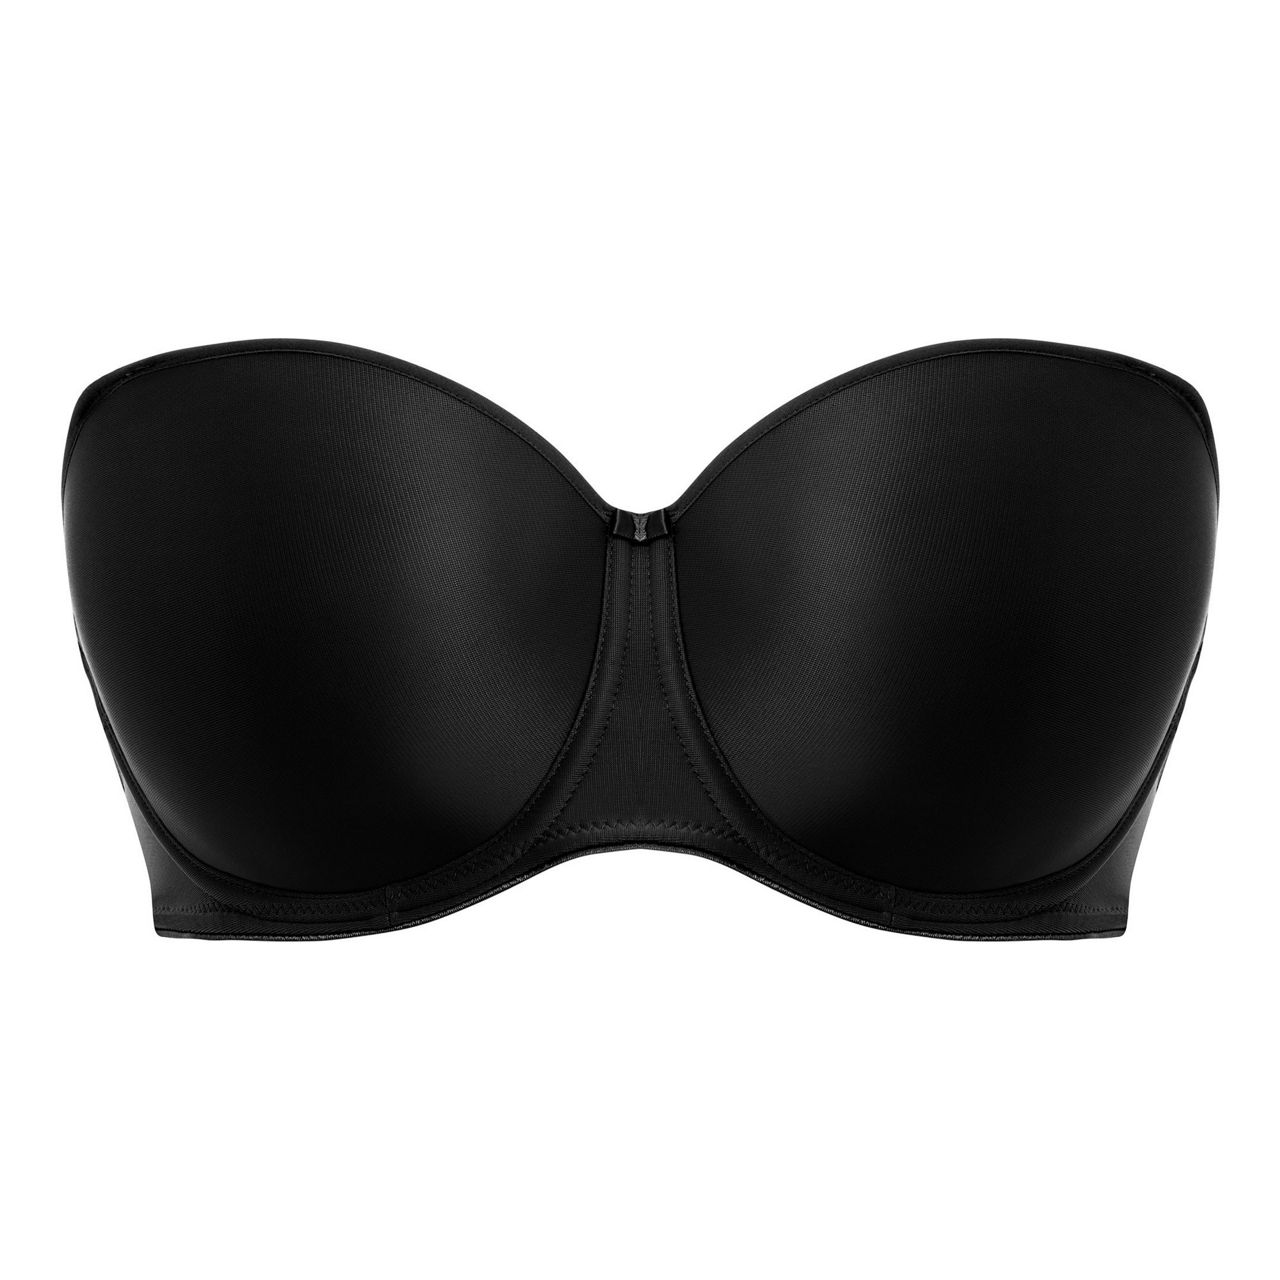 Bra Review - Fantasie Smoothing Moulded Strapless Bra (4530